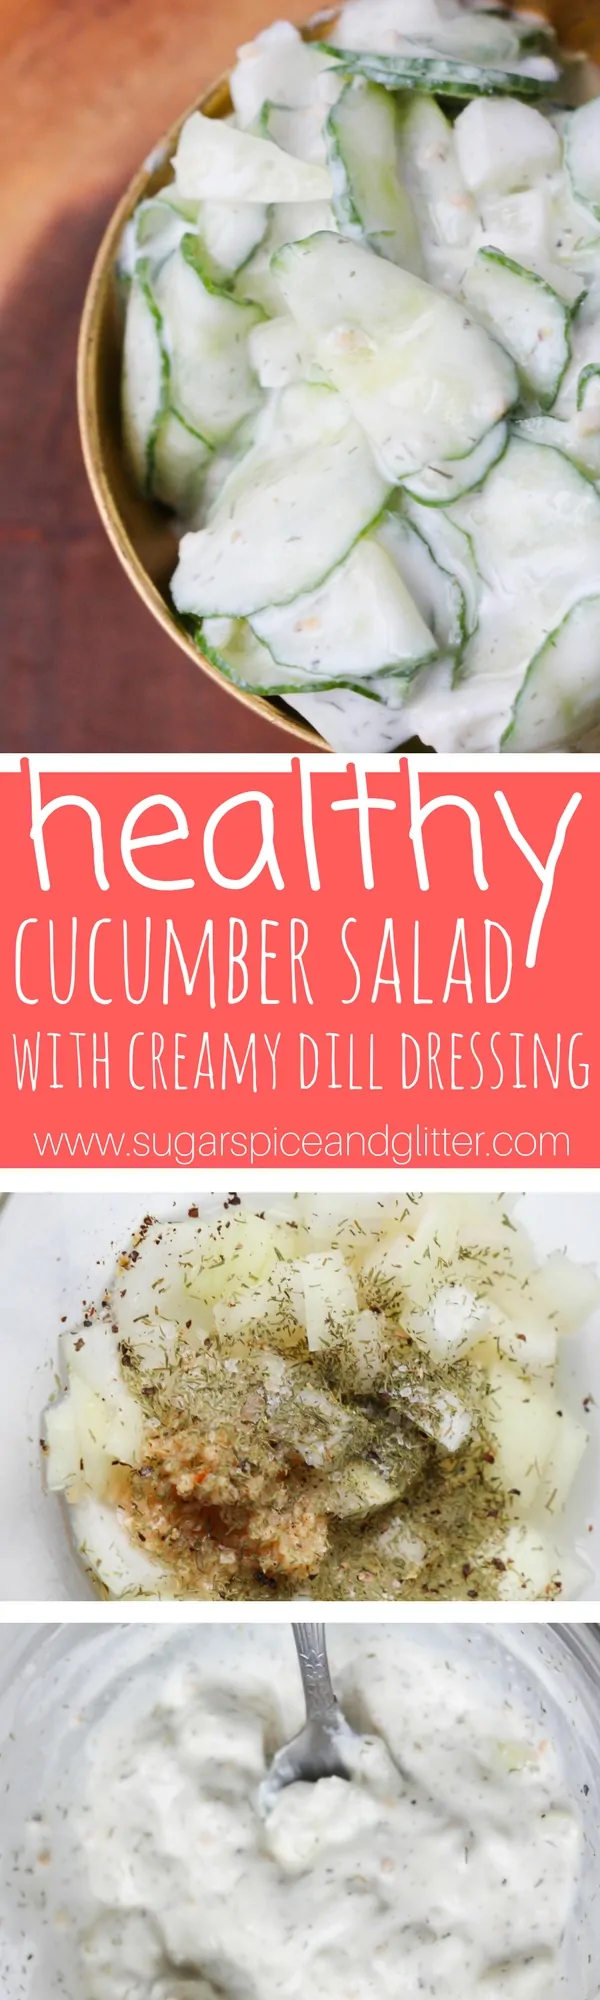 A creamy, tangy and refreshing cucumber salad recipe - this vegetable side dish is ready in less than 5 minutes and makes a great last-minute addition to a BBQ or busy weeknight meal.